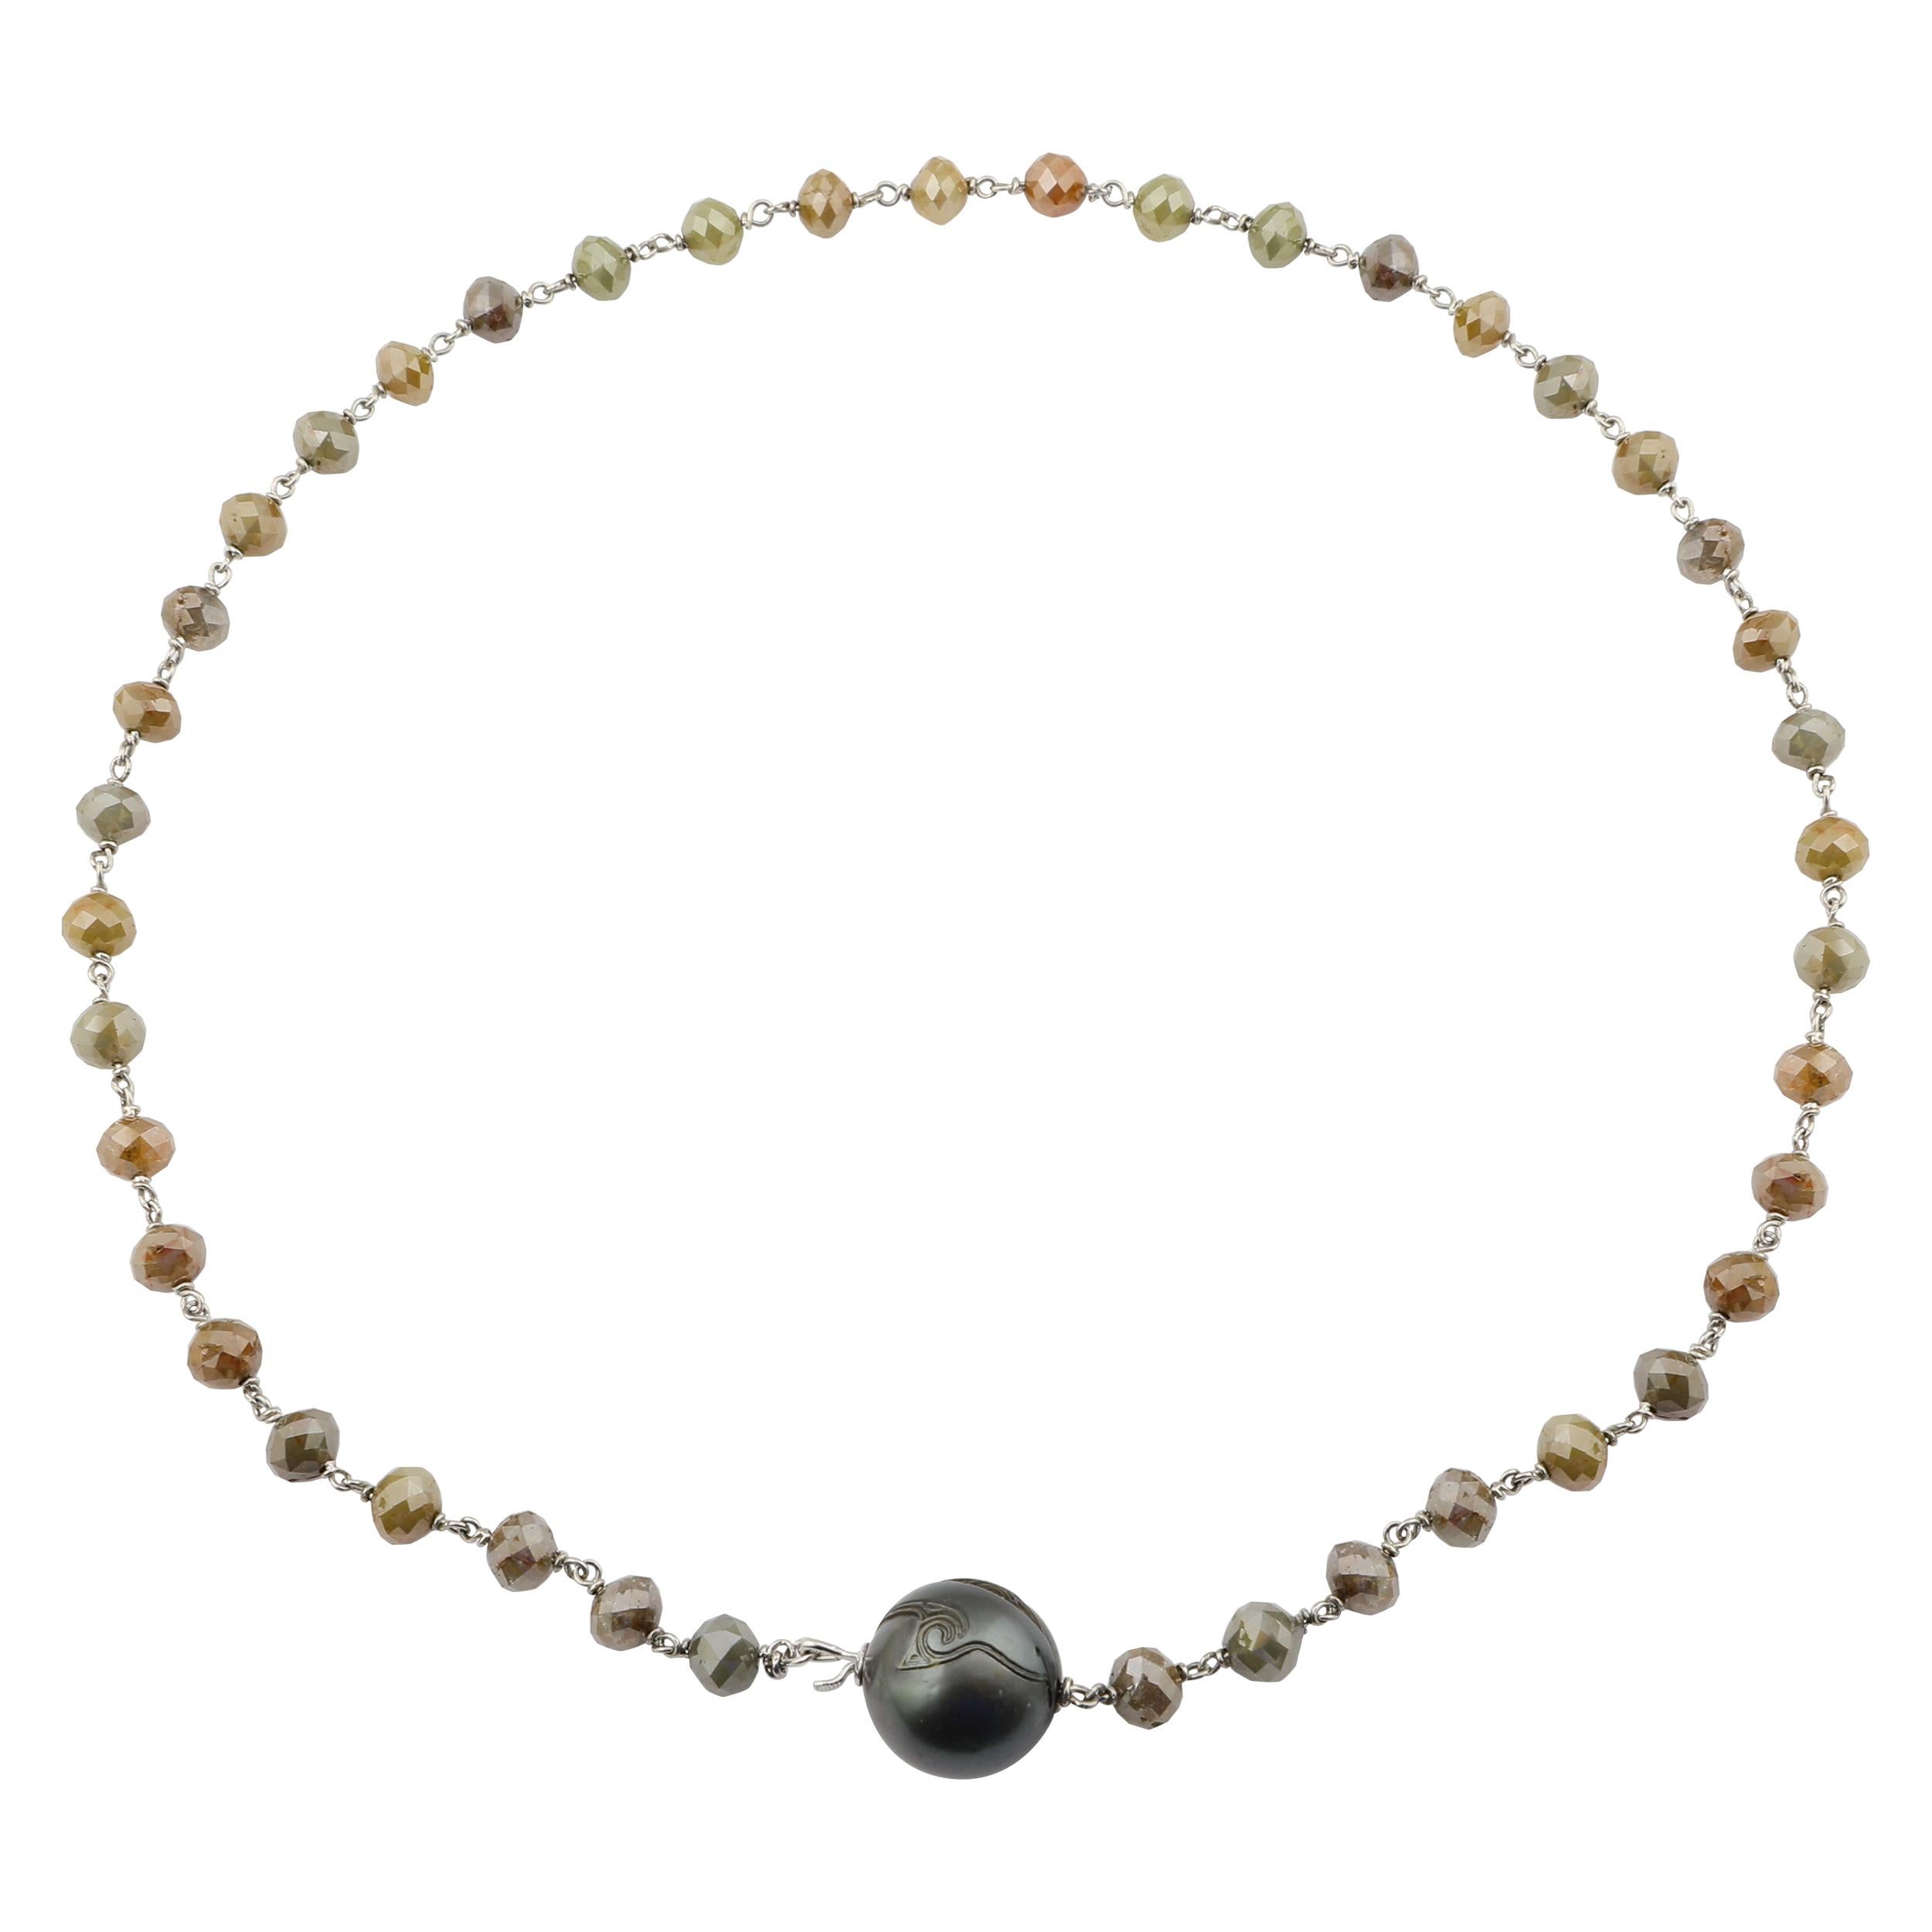 Zoe X blueviewATELIER 100.80 Ct opaque diamond beads platinum Tahitian hand carved 14.33mm pearl center 16 inches necklace clasp at pearl

Zoe was sold exclusively at the fine jewelry department in Barneys New York across the country from 2005 until